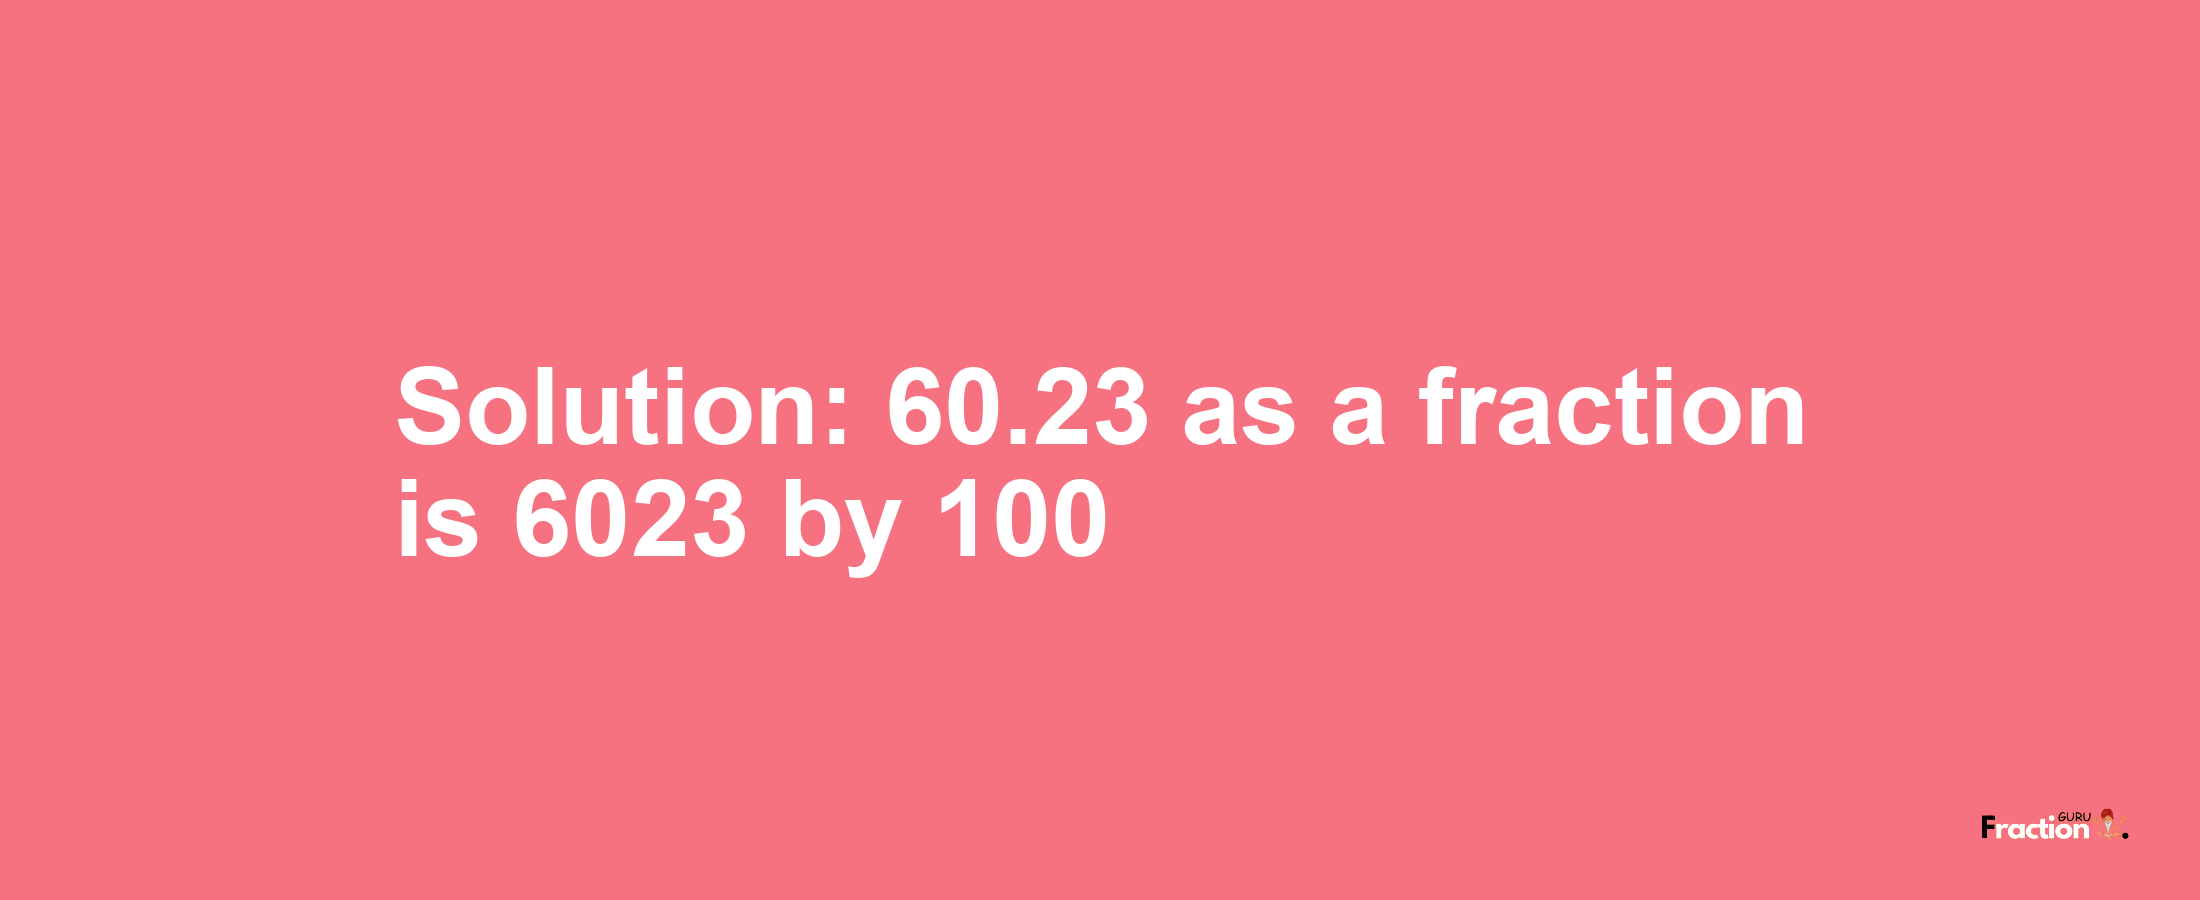 Solution:60.23 as a fraction is 6023/100